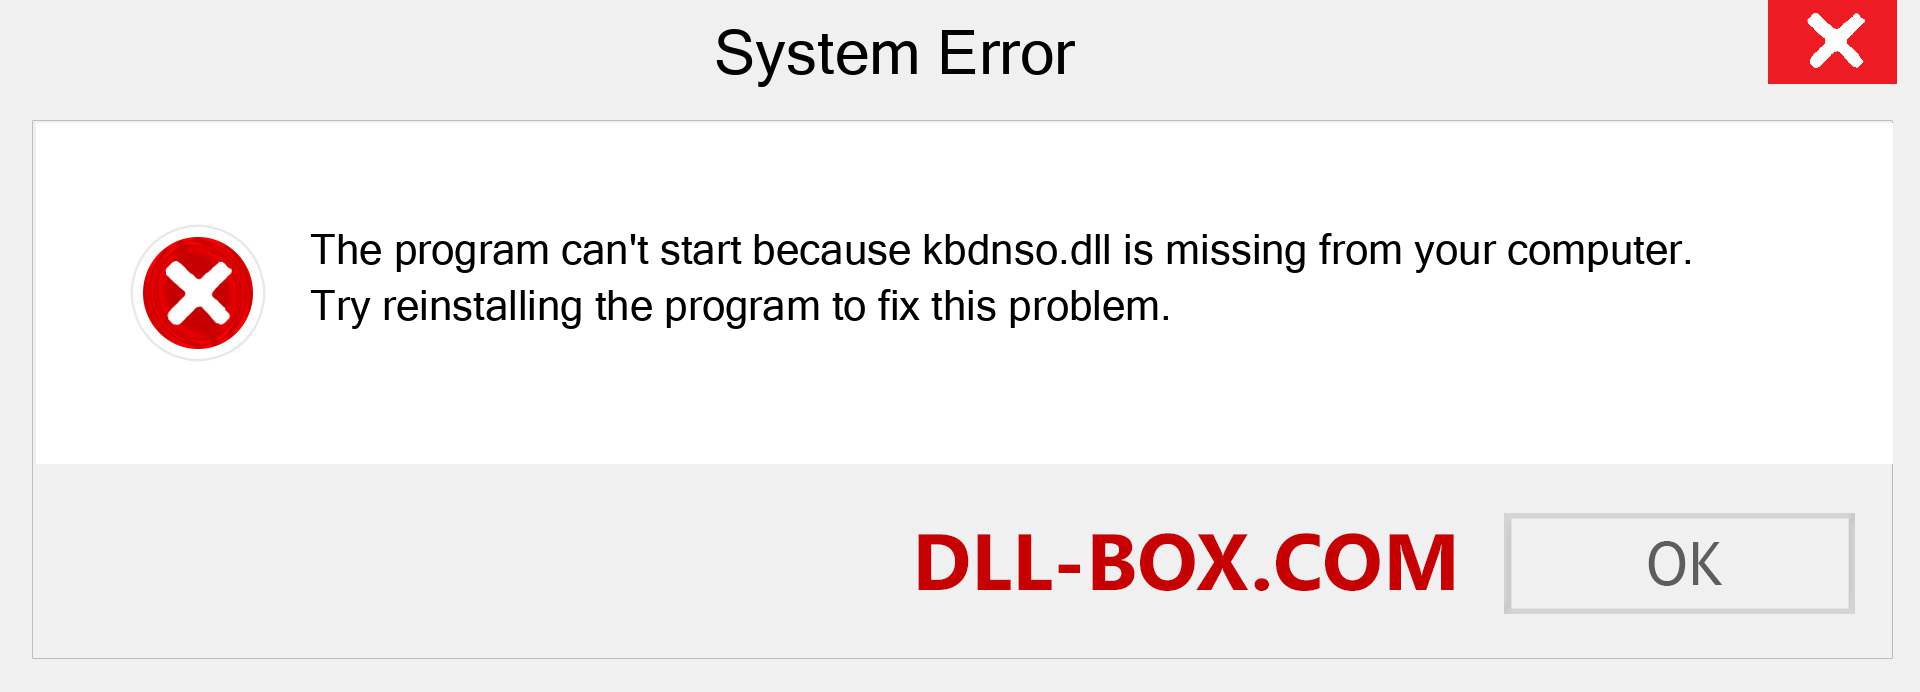  kbdnso.dll file is missing?. Download for Windows 7, 8, 10 - Fix  kbdnso dll Missing Error on Windows, photos, images